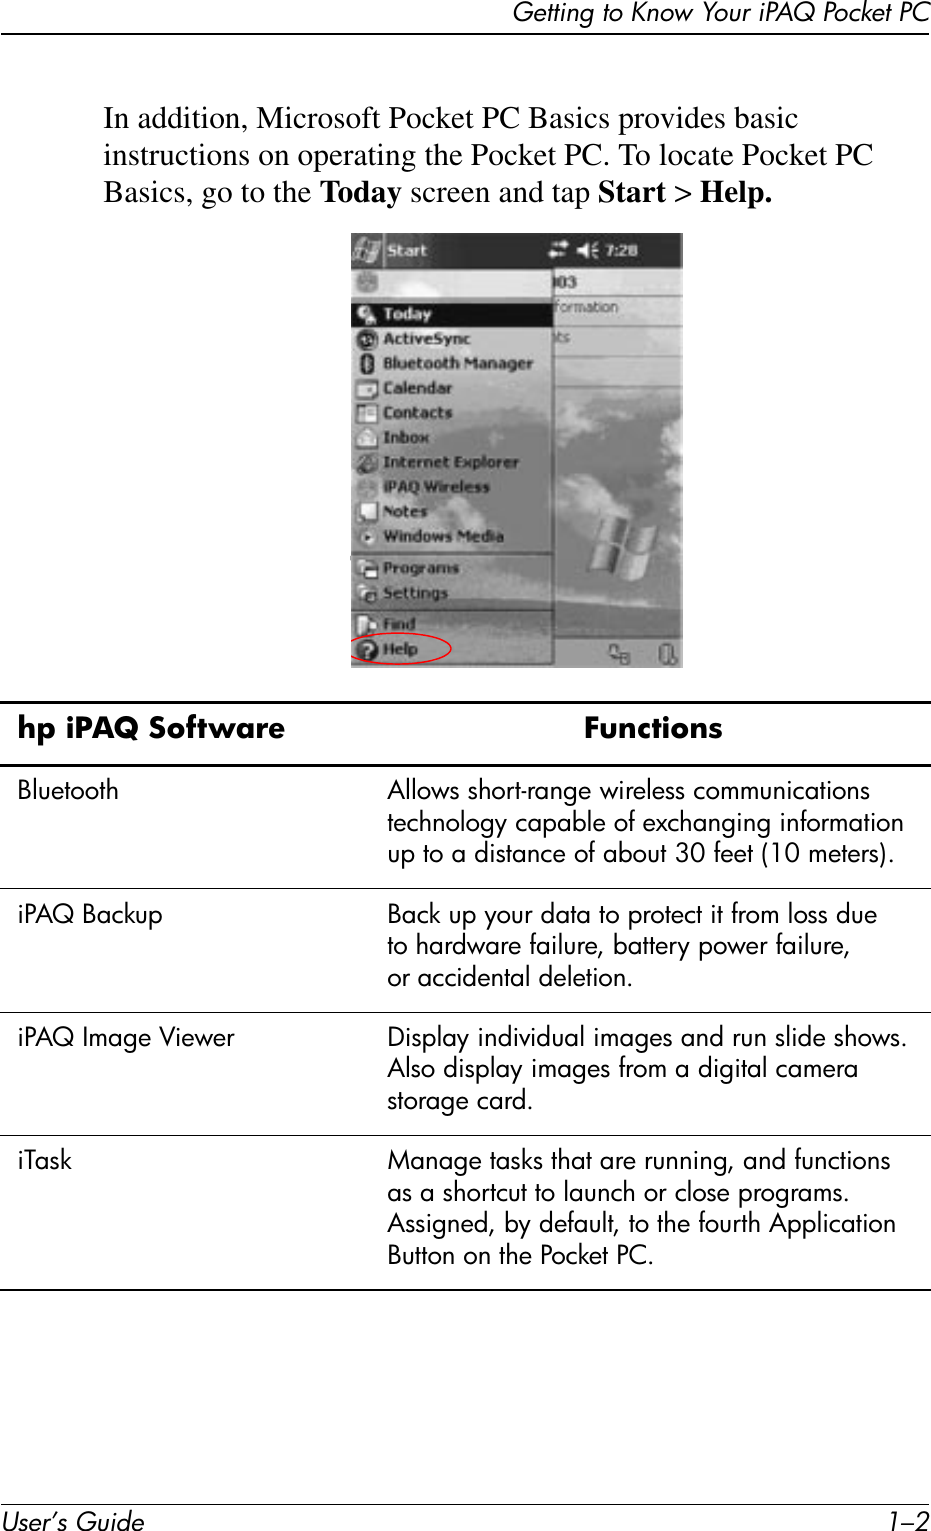 User’s Guide 1–2Getting to Know Your iPAQ Pocket PCIn addition, Microsoft Pocket PC Basics provides basic instructions on operating the Pocket PC. To locate Pocket PC Basics, go to the Today screen and tap Start &gt; Help.hp iPAQ Software FunctionsBluetooth Allows short-range wireless communications technology capable of exchanging information up to a distance of about 30 feet (10 meters).iPAQ Backup Back up your data to protect it from loss due to hardware failure, battery power failure, or accidental deletion.iPAQ Image Viewer Display individual images and run slide shows. Also display images from a digital camera storage card.iTask Manage tasks that are running, and functions as a shortcut to launch or close programs. Assigned, by default, to the fourth Application Button on the Pocket PC.